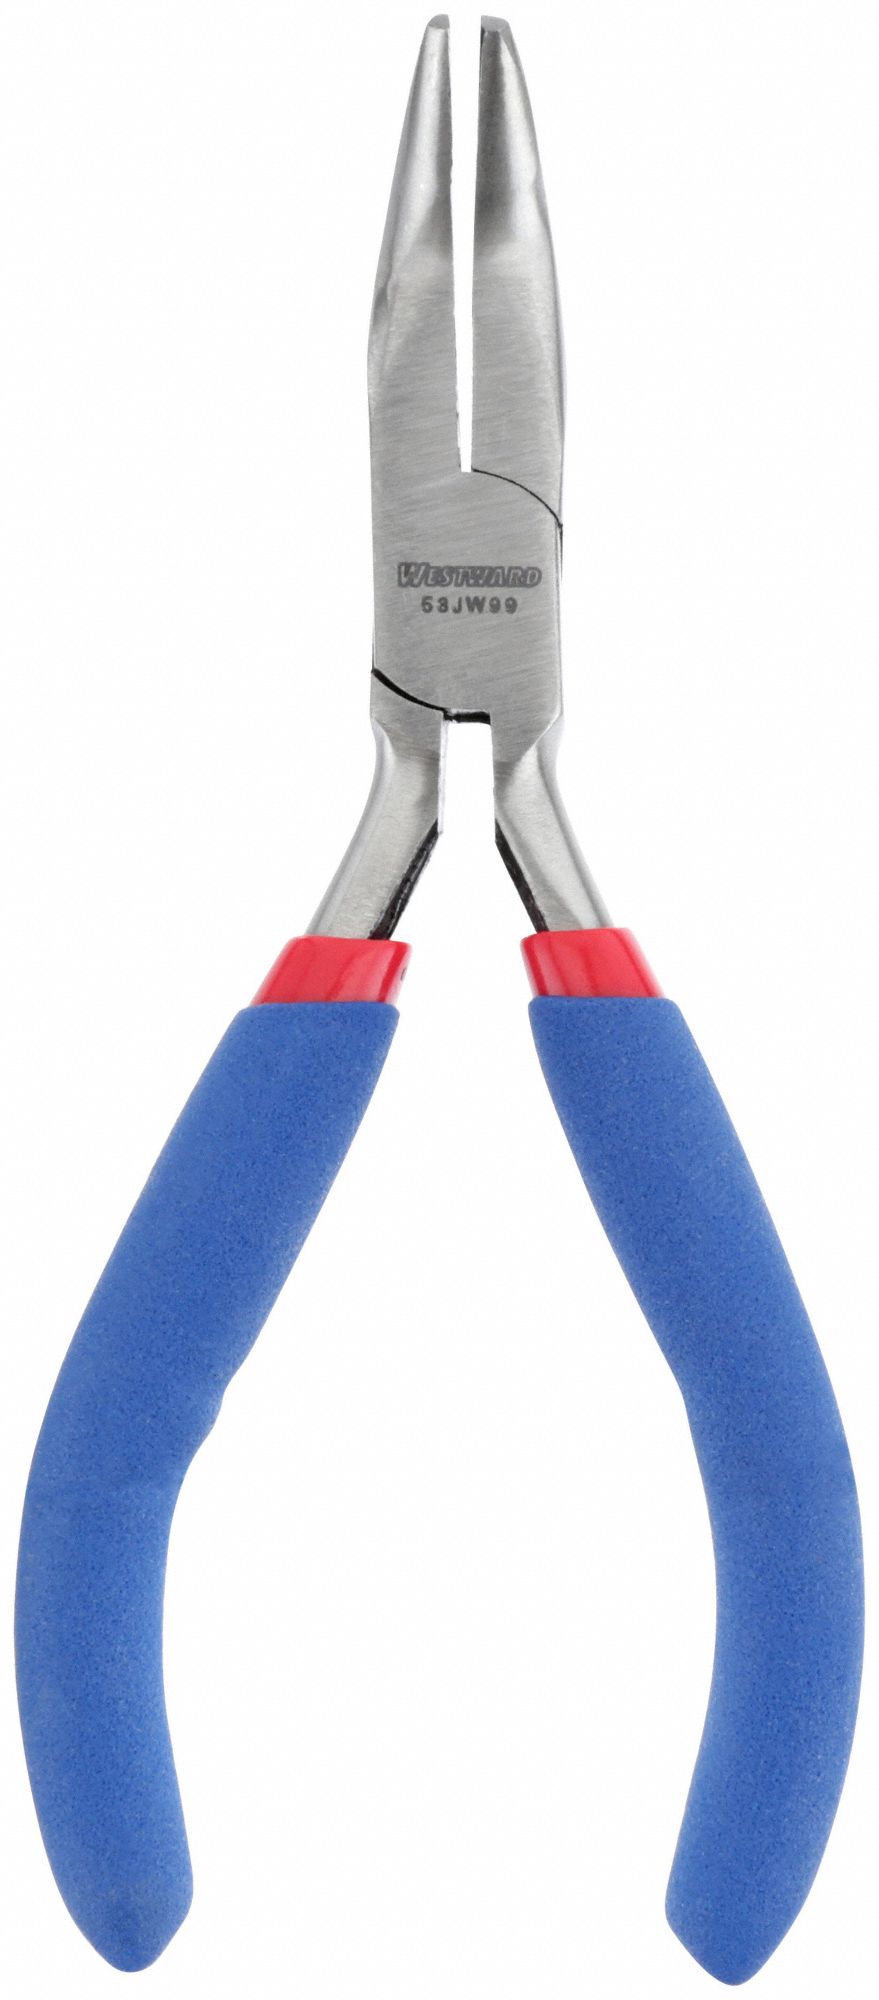 WESTWARD BENT NEEDLE NOSE PLIER,4-1/2 L,SMOOTH - Needle, Bent and